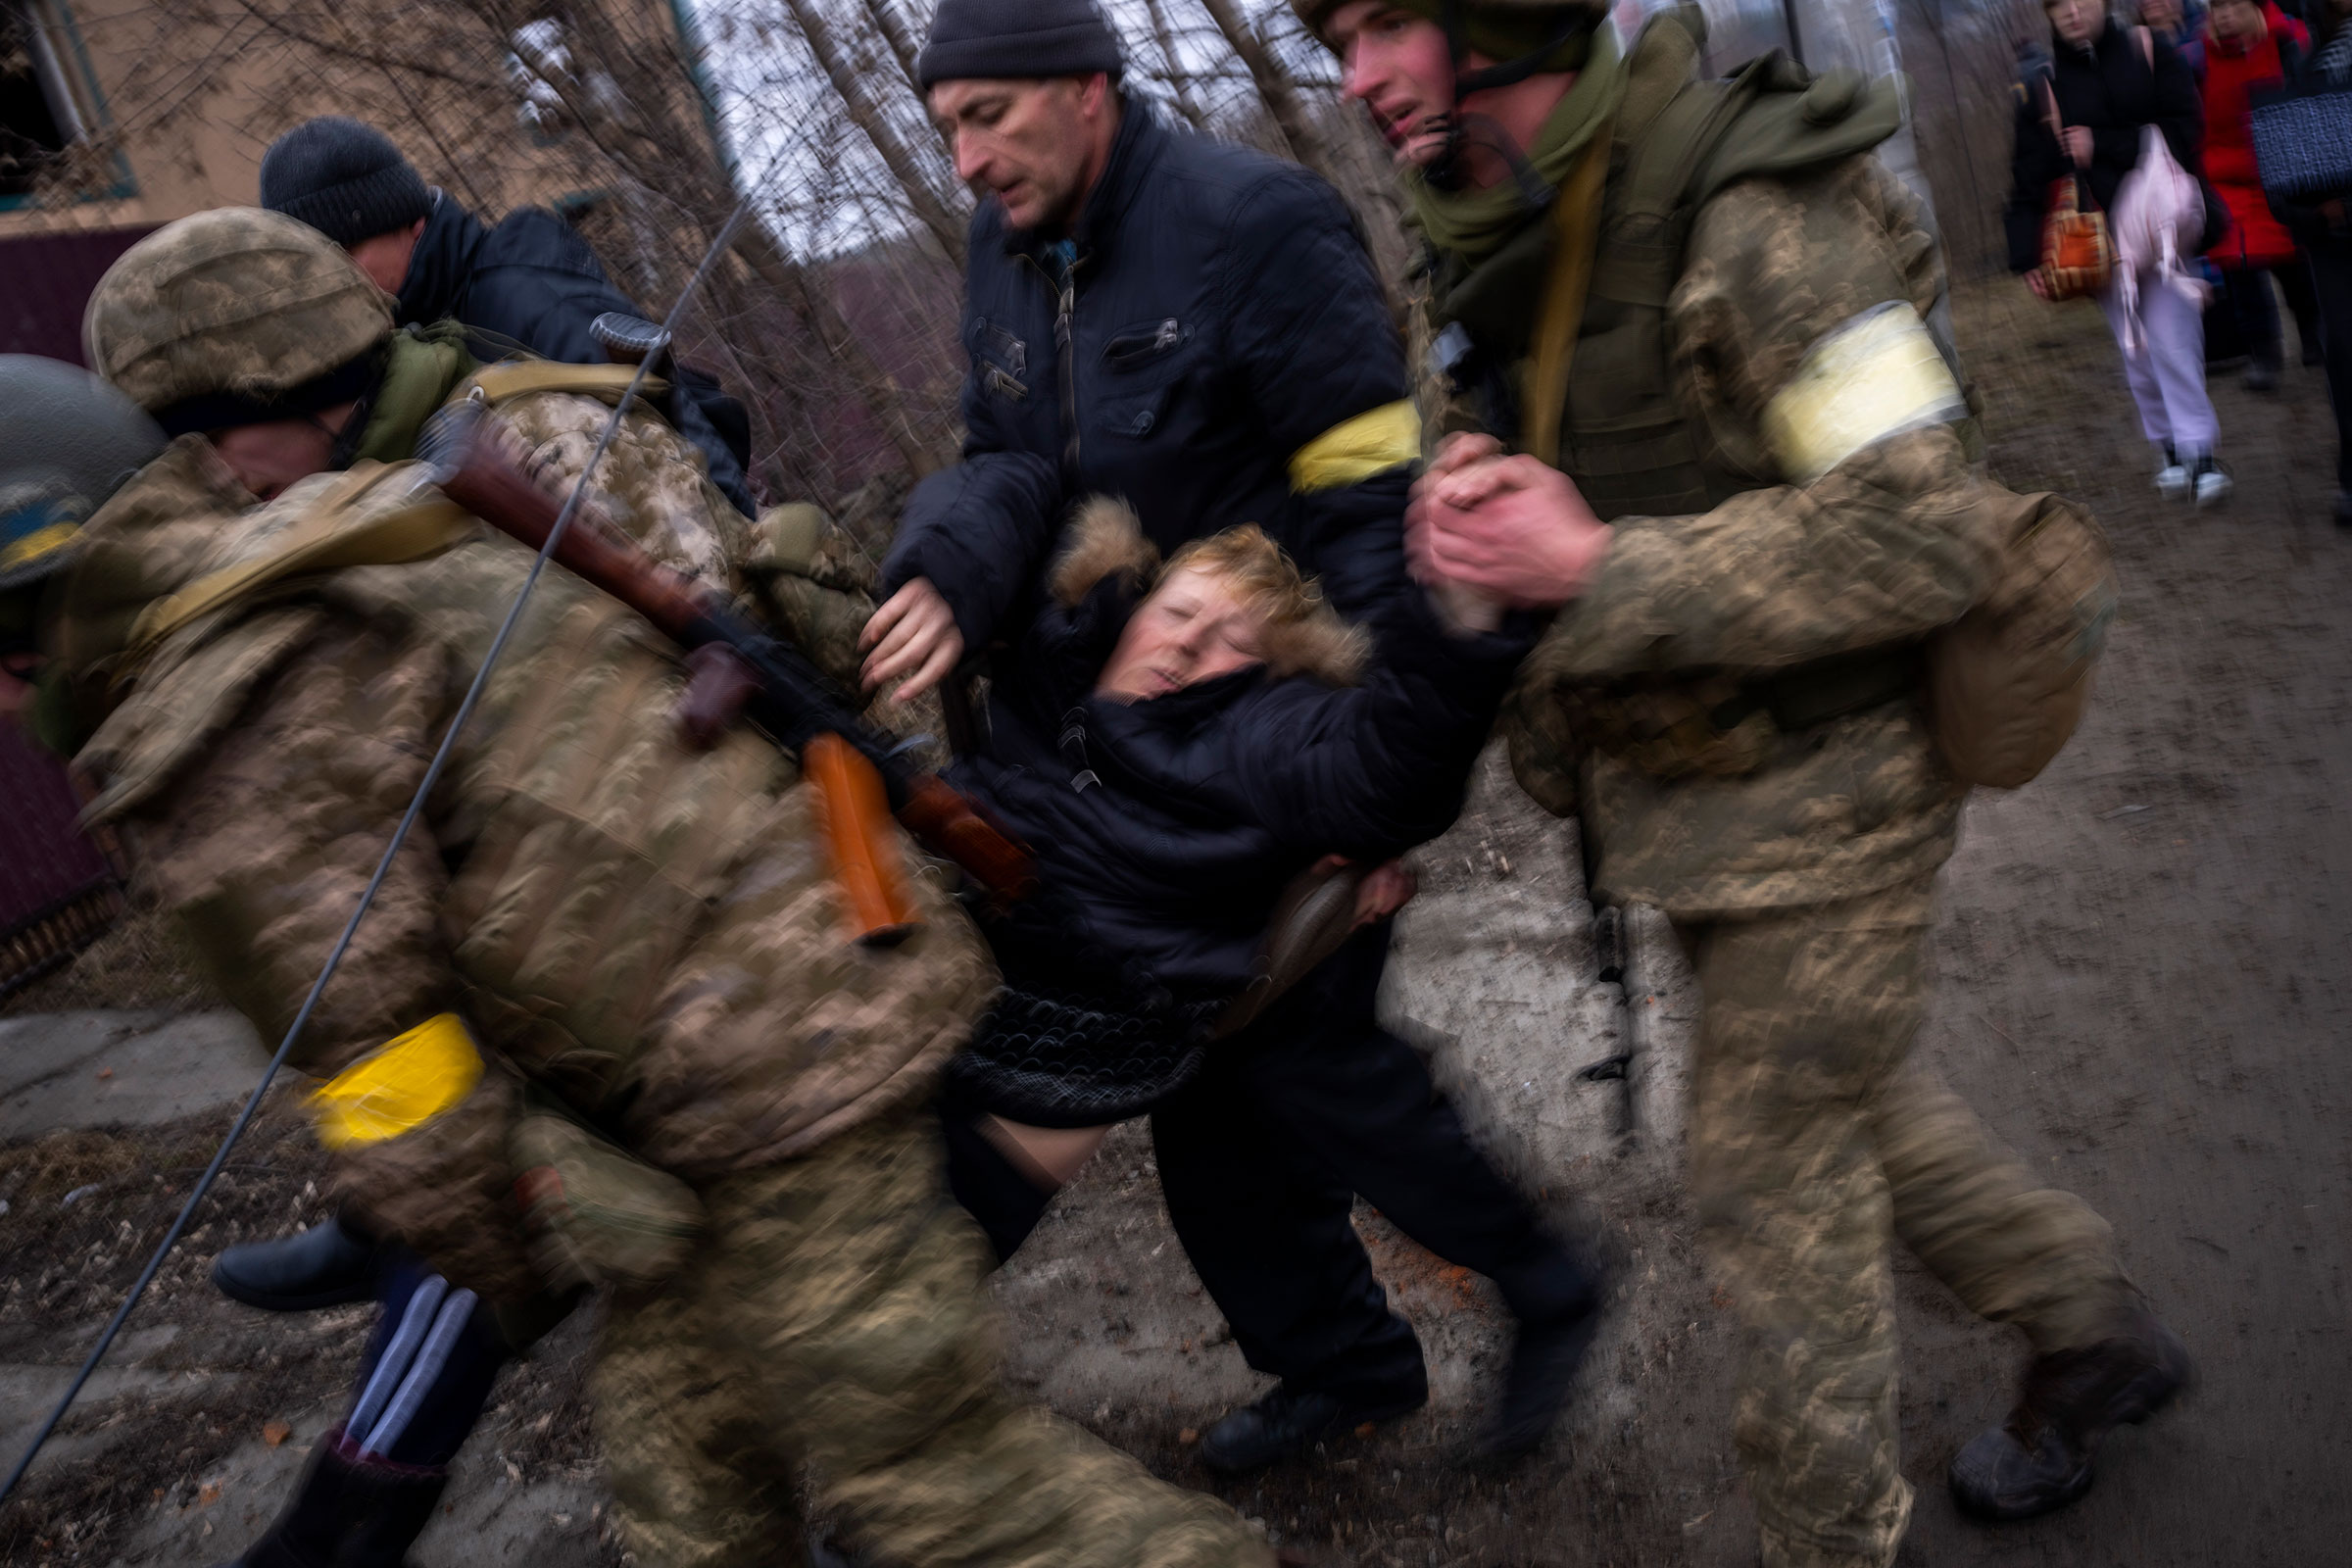 A sick woman in a semi-conscious state is carried by Ukrainian soldiers as they cross the Irpin river while fleeing the city in the outskirts of Kyiv on March 5.